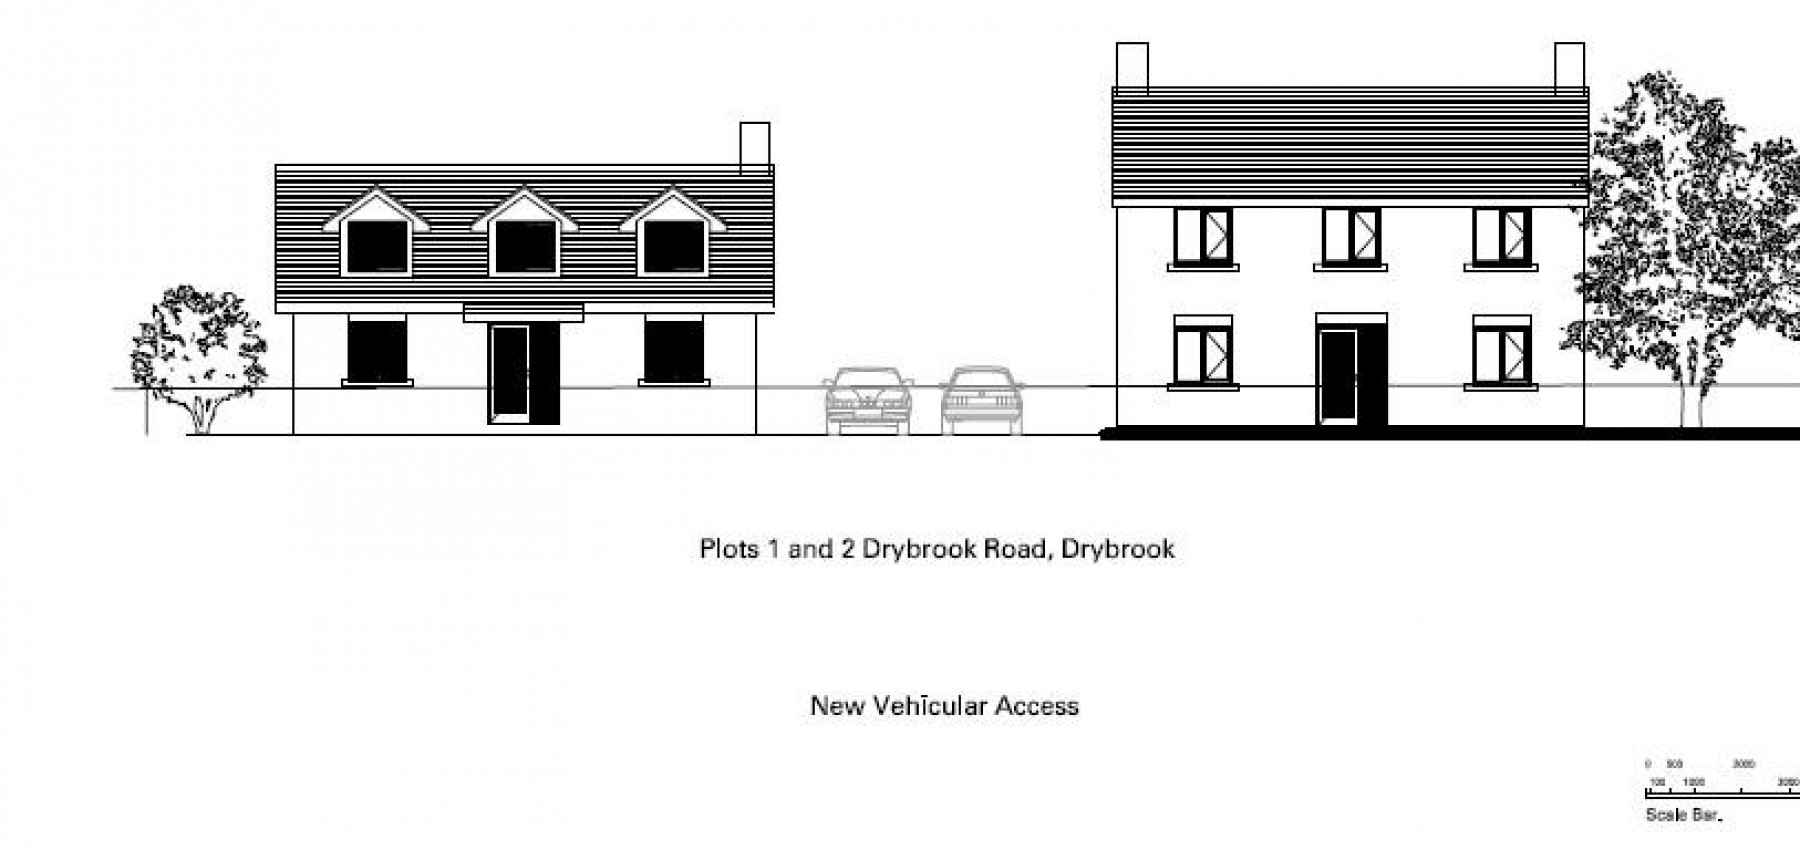 Images for PLANNING GRANTED - 4 DETACHED HOUSE - DRYBROOK